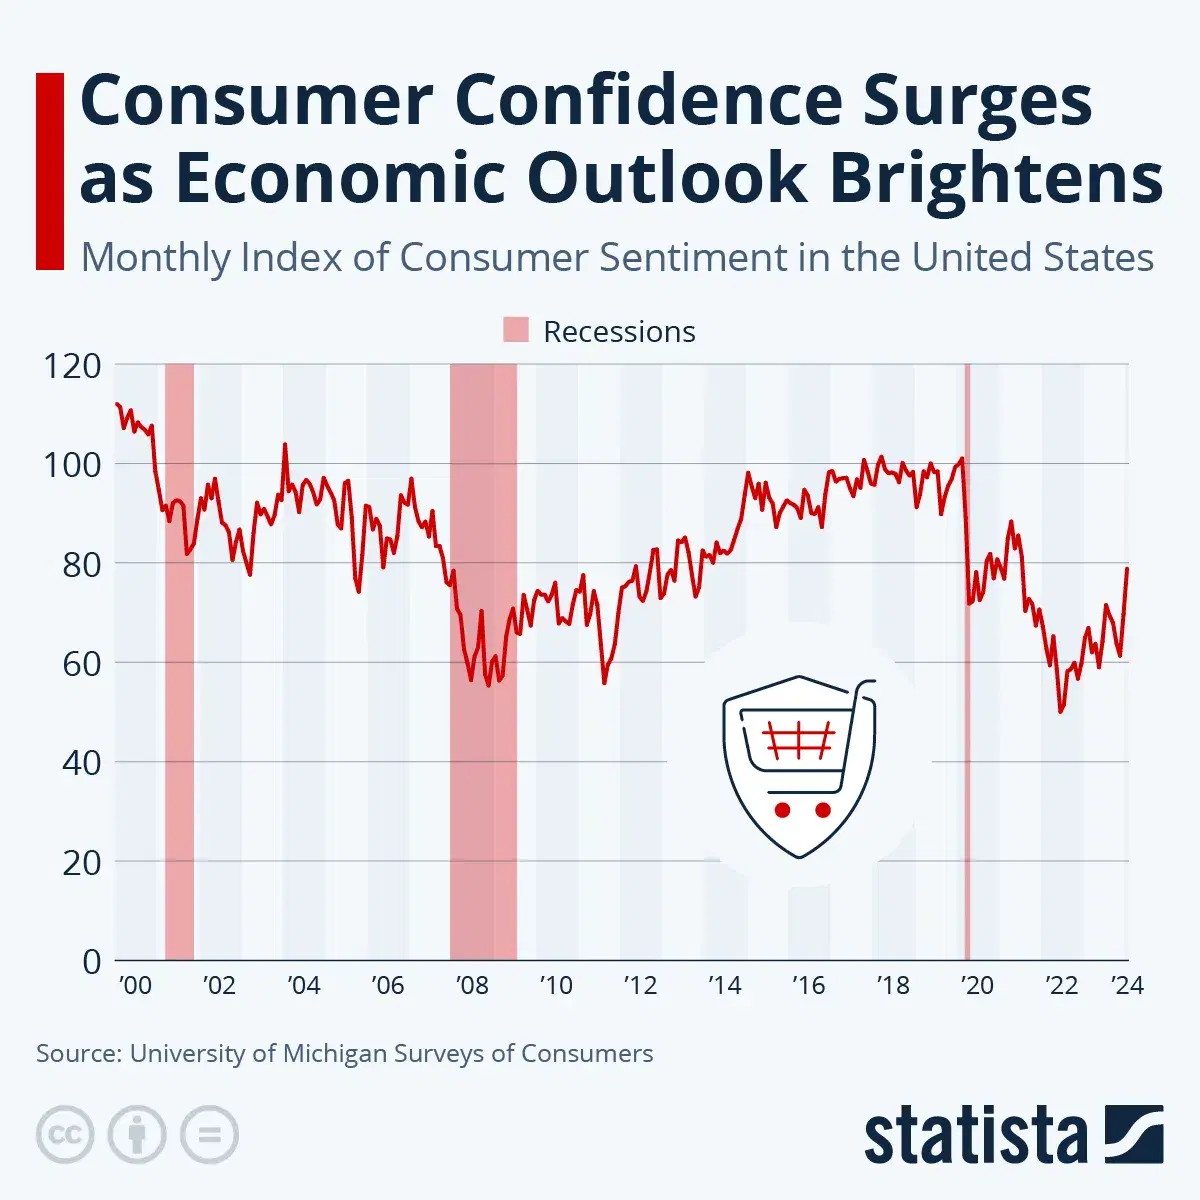 Consumer Confidence Surges as Economic Outlook Brightens